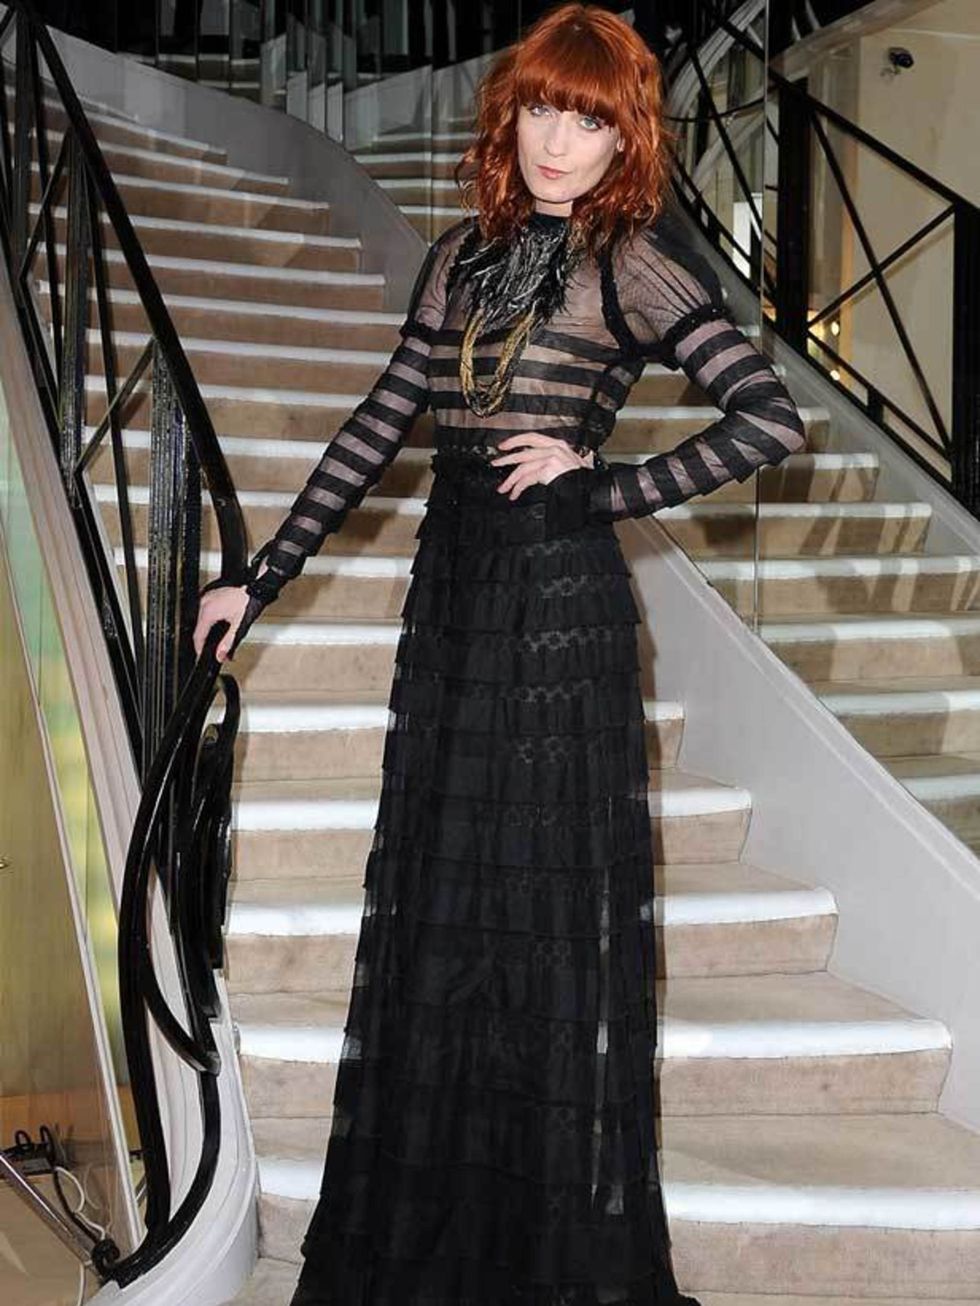 <p><a href="Chanel%20Dinner,%20Paris%20Fashion%20Week,%20Hogan,%20Autumn/Winter%202011,%20Karl%20Lagerfeld,%20Chanel,%20Blake%20Lively">Florence Welch</a> attends the Chanel dinner hosted in Blake Livelys honour during Paris Fashion Week on March 5, 2011